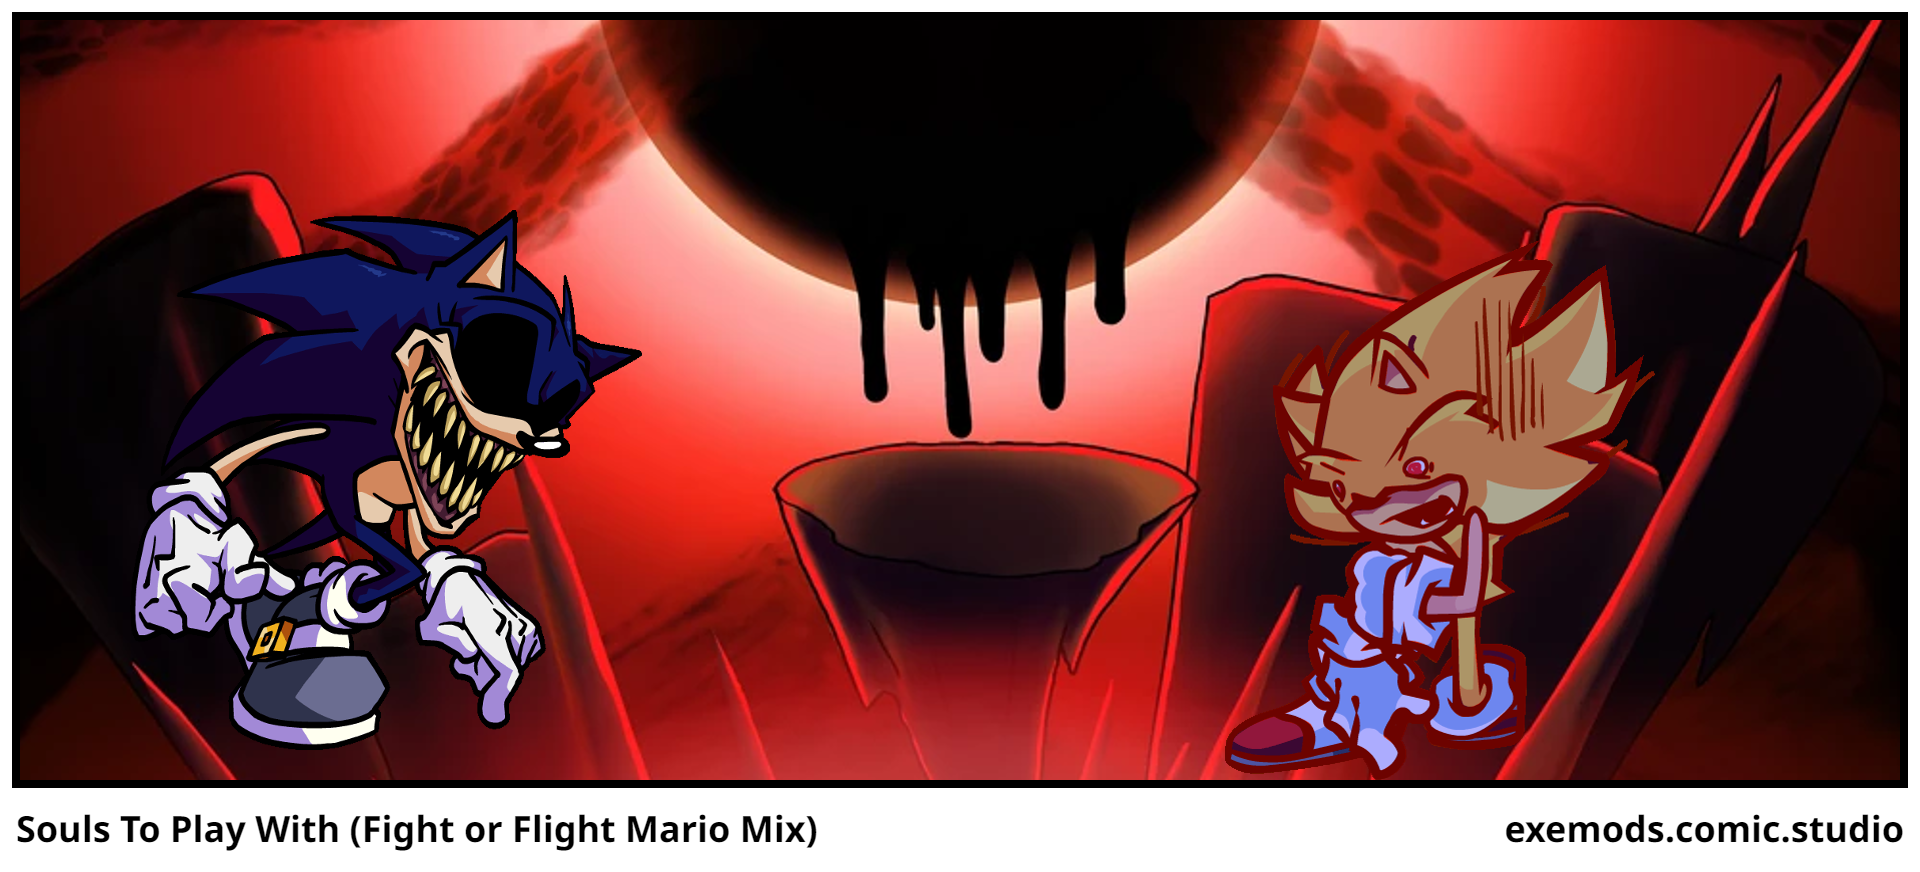 Souls To Play With (Fight or Flight Mario Mix)